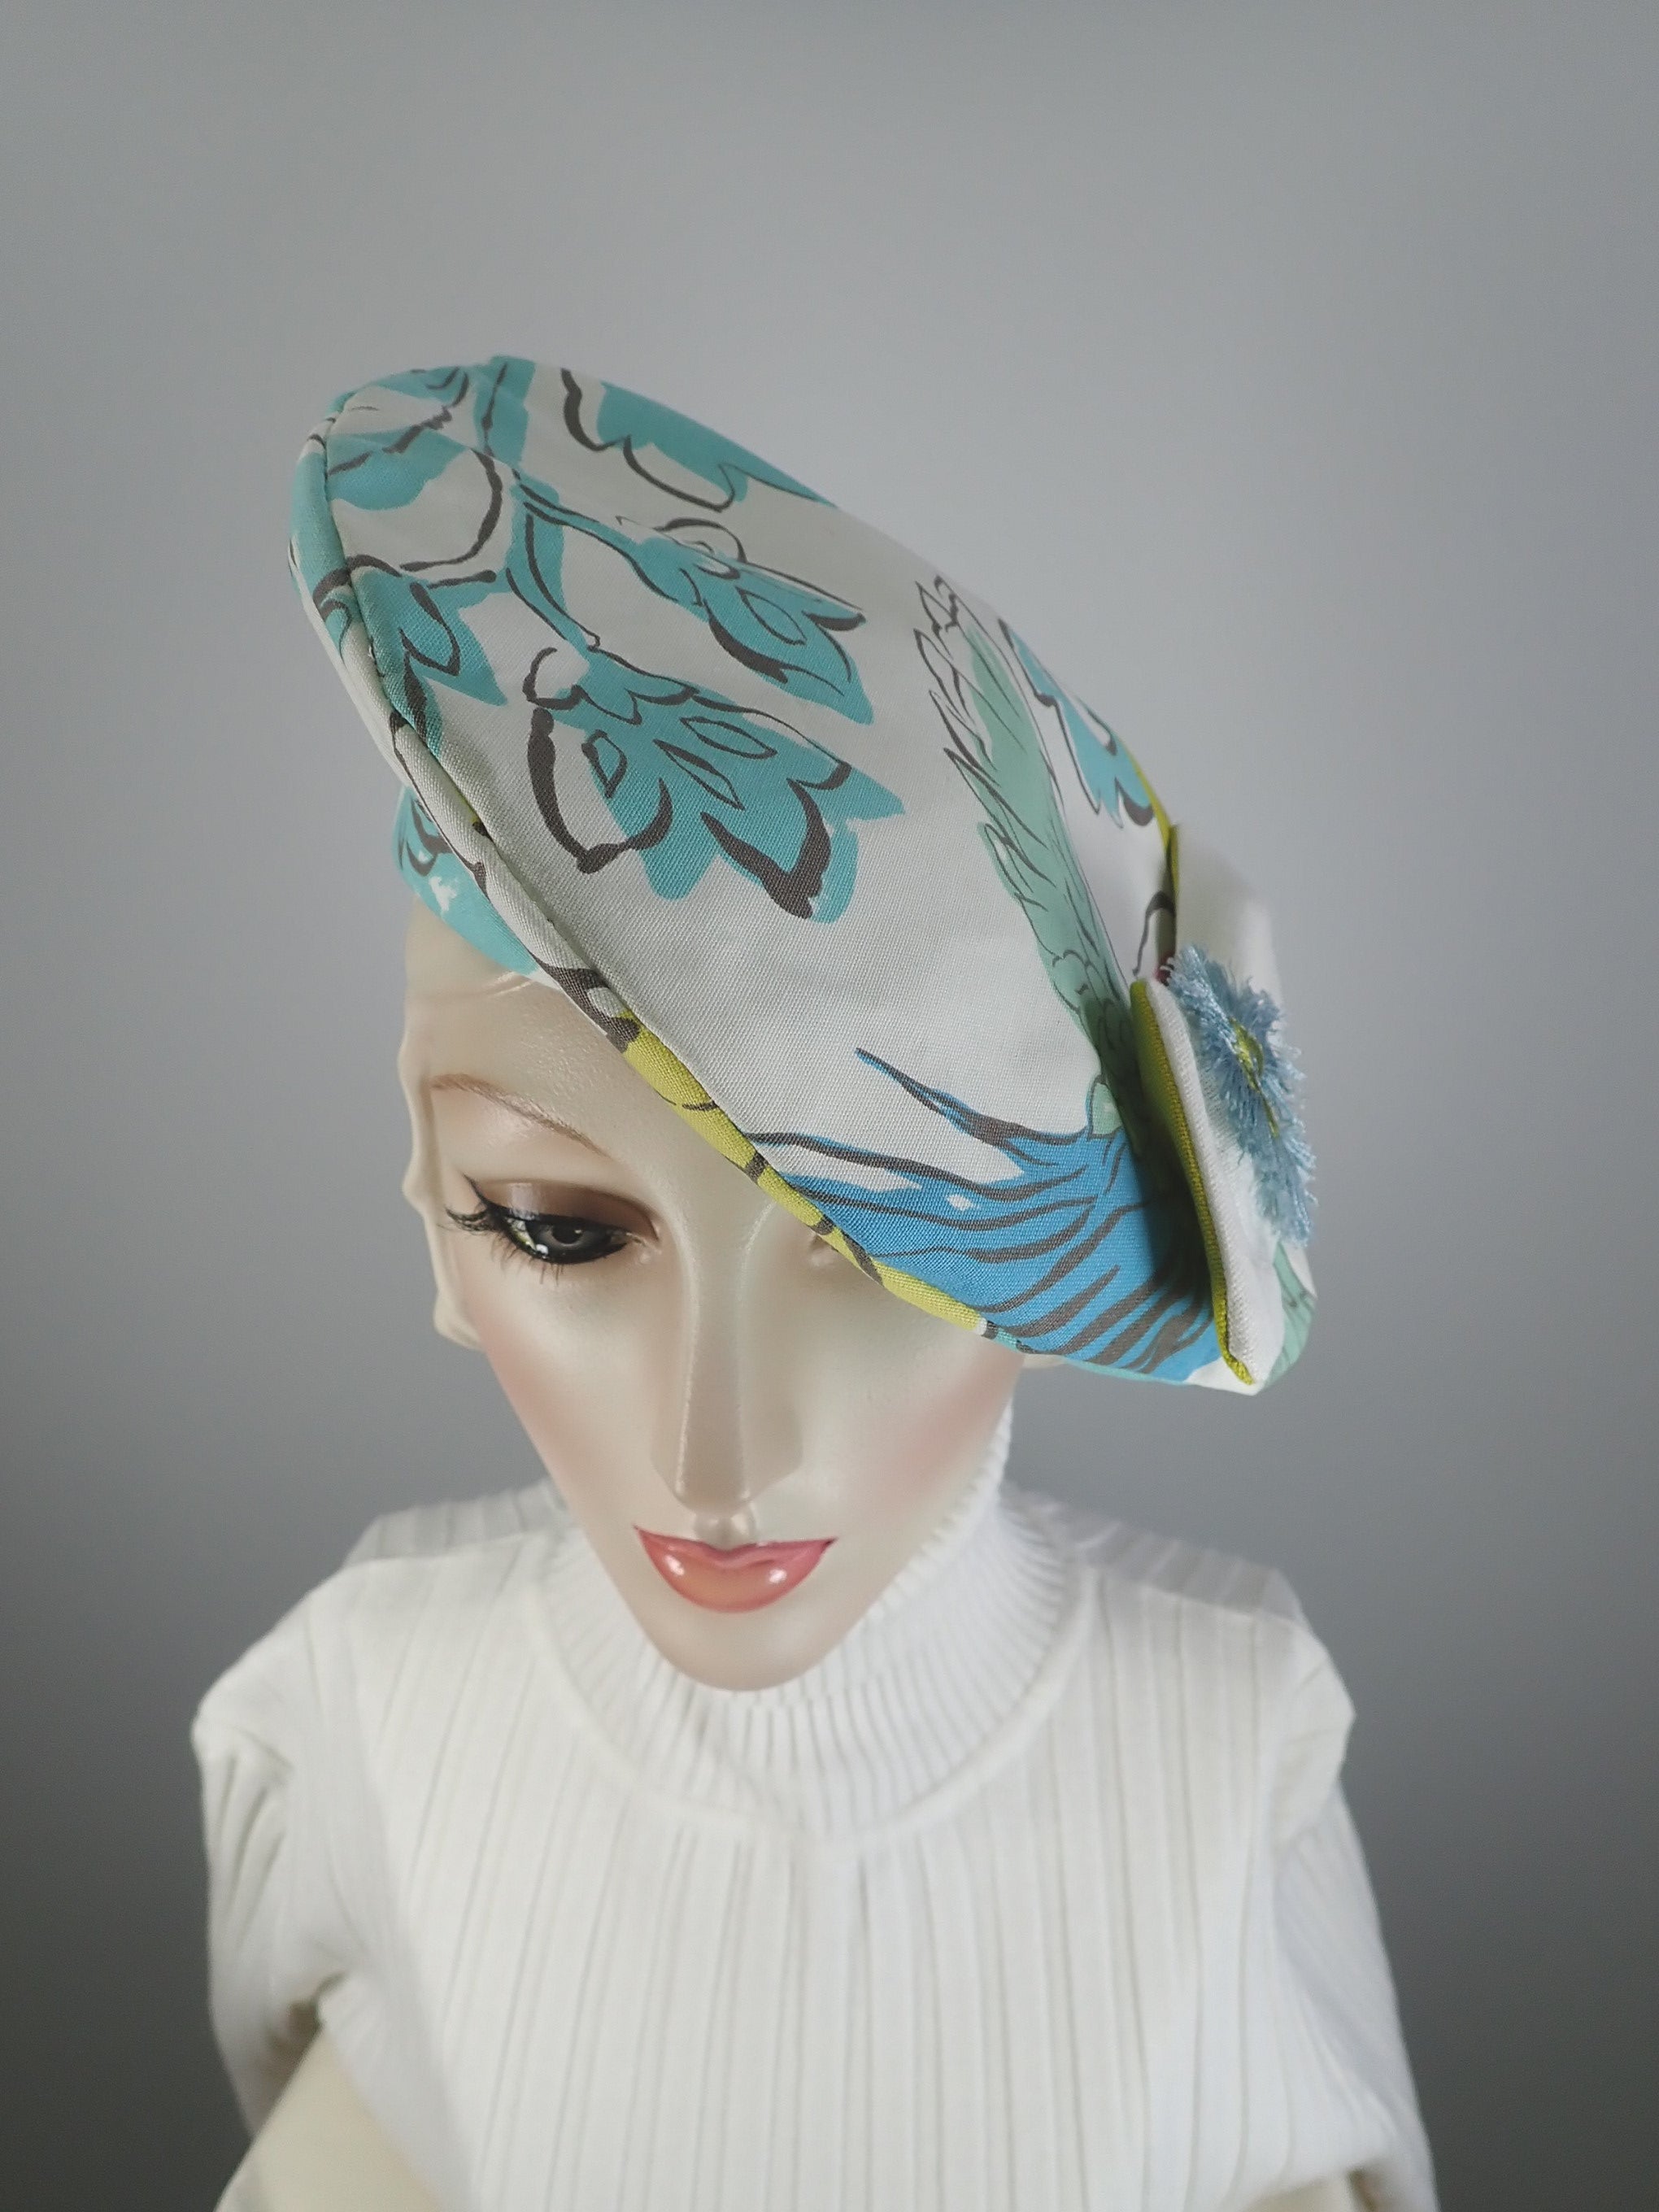 Funky fun beret Hat 1940s style. Colorful Floral asymmetrical beret hat. Sustainable fabric Statement hat. Soft fabric beret.